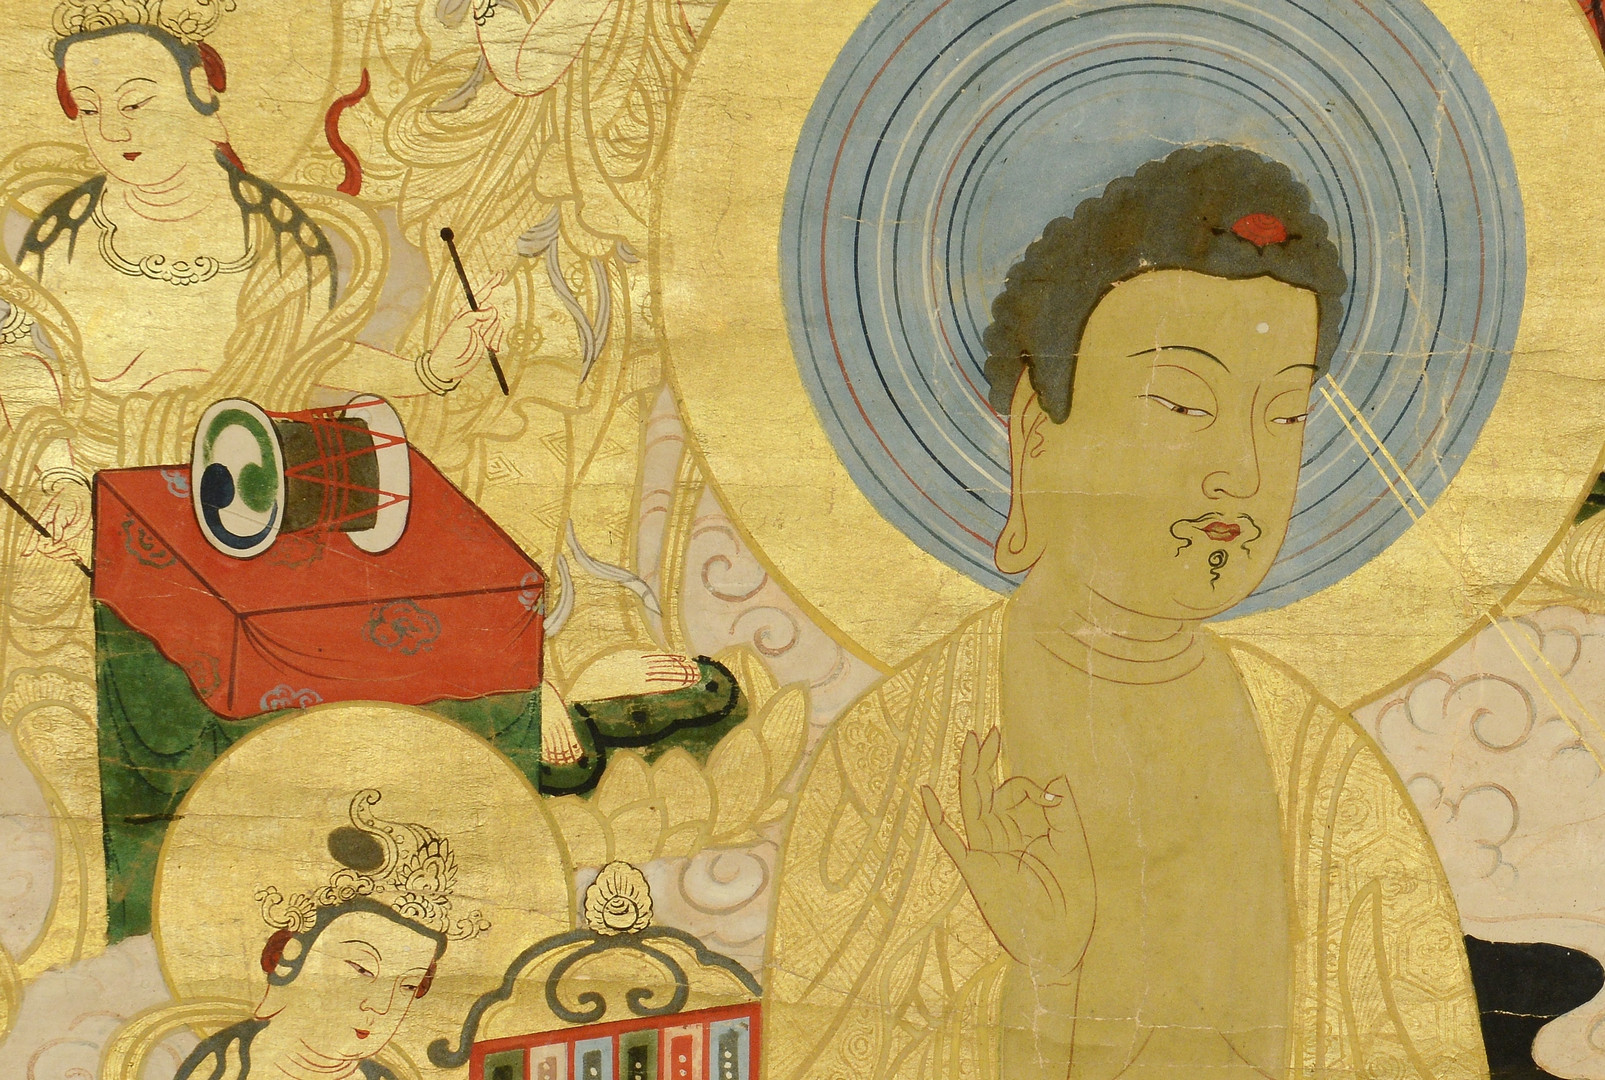 Lot 24: 19th c. Scroll Painting, Buddha at Festival Time